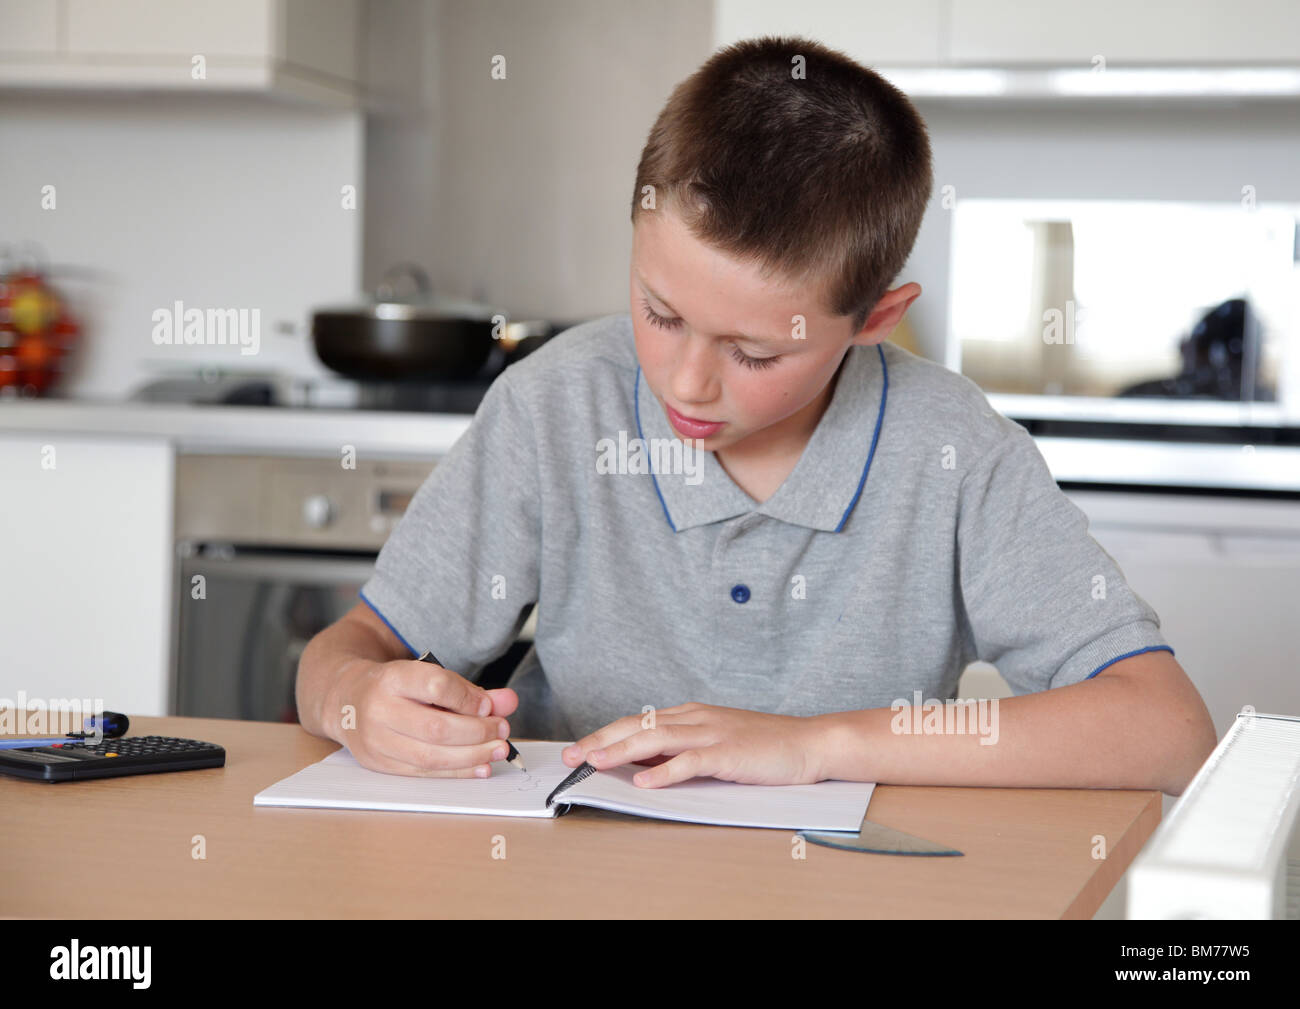 Young boy doing homework on kitchen table Stock Photo